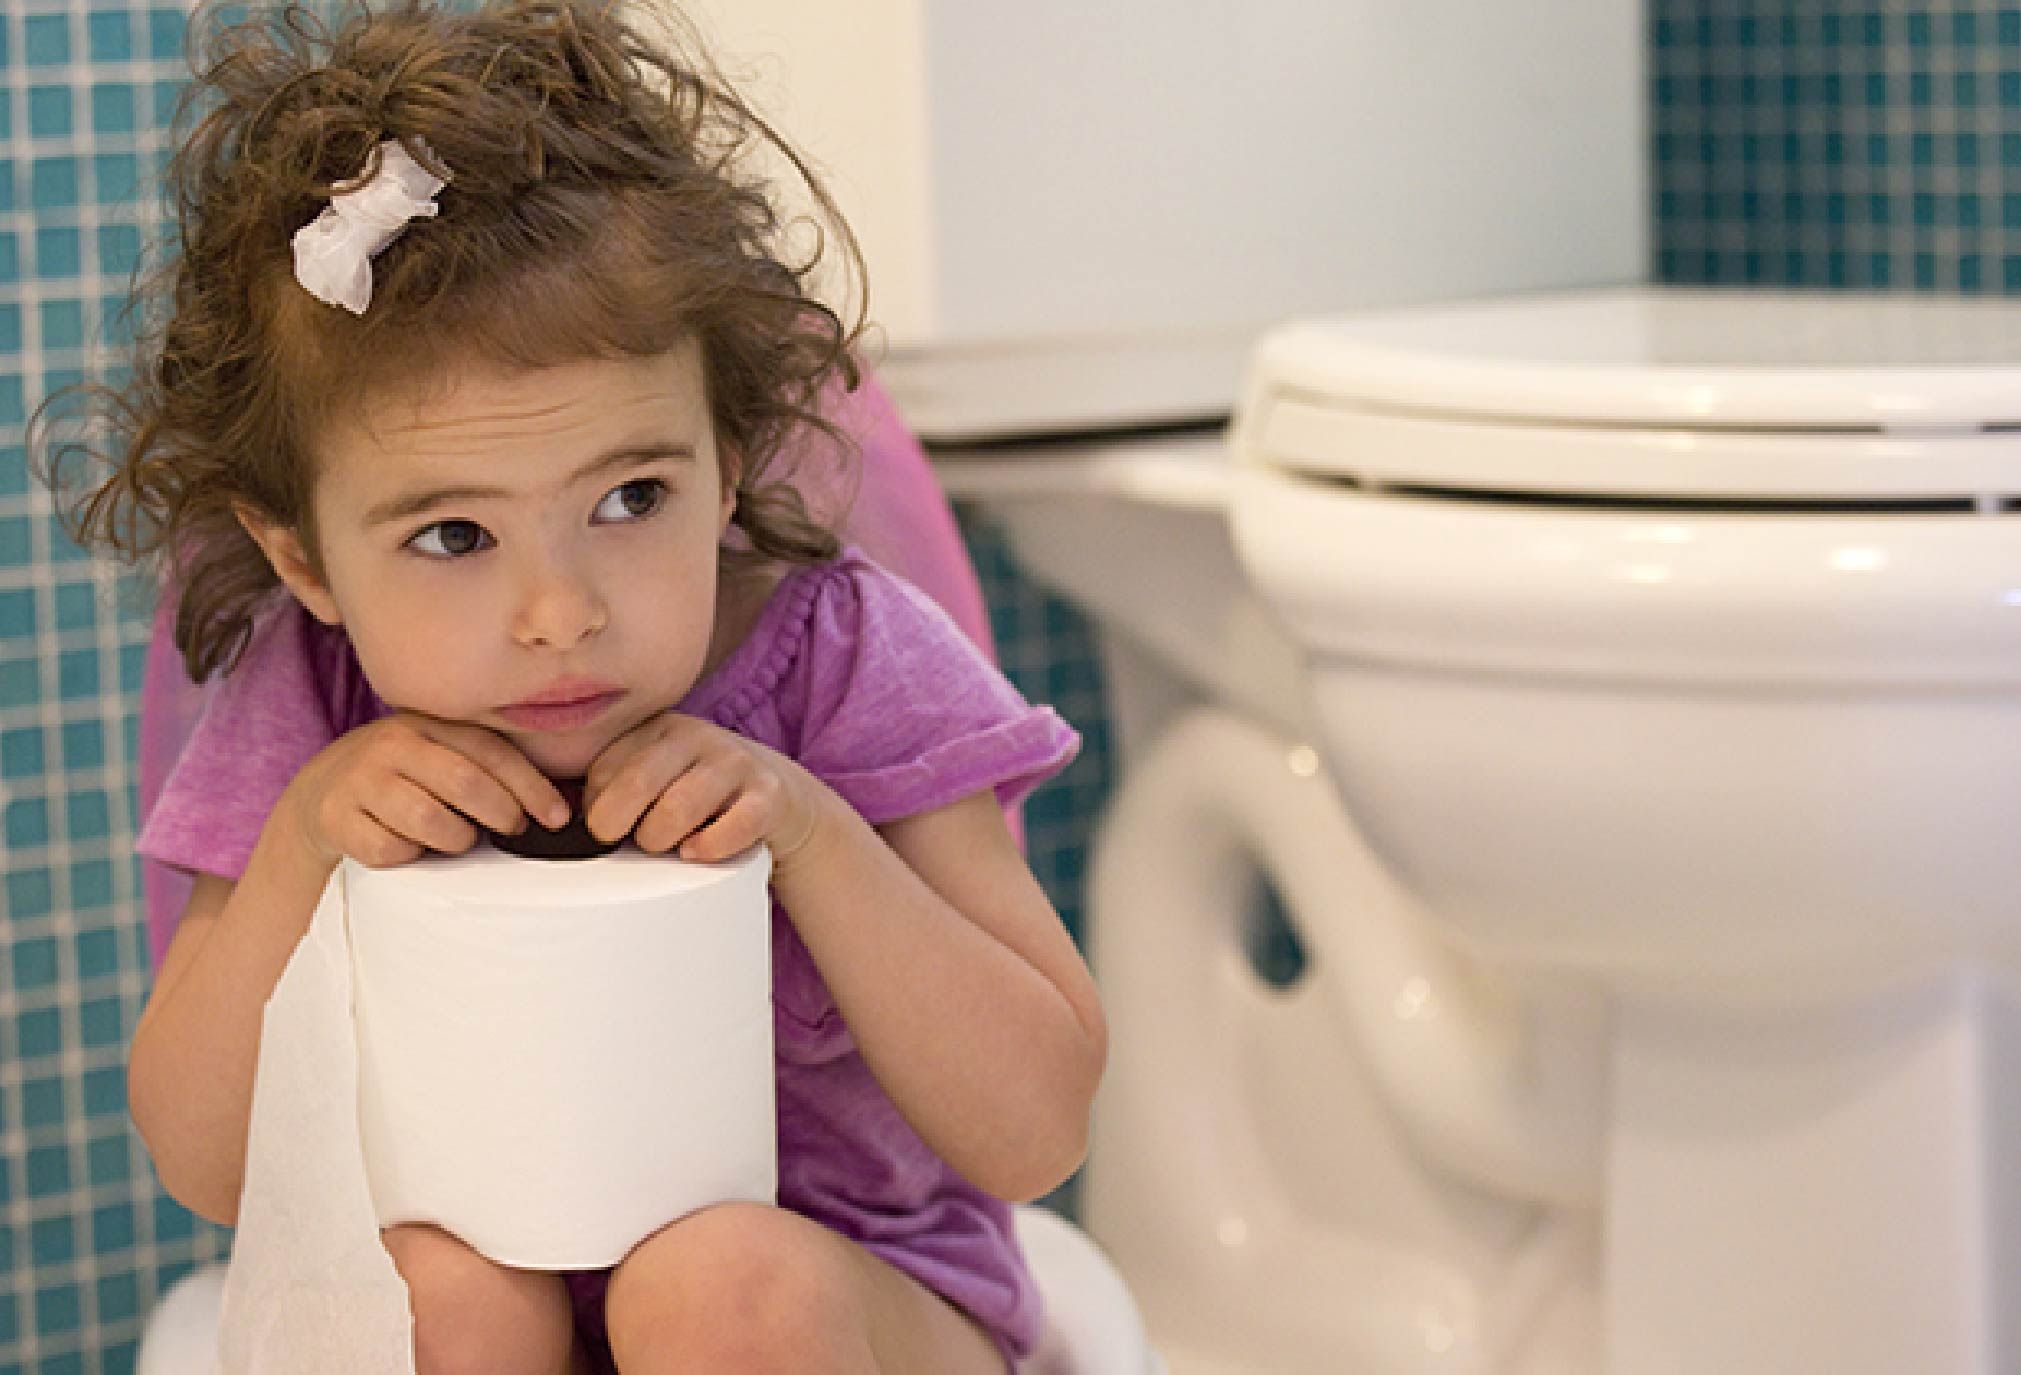 A Constipated Young Girl Using A Potty by Ron Sutherland/science